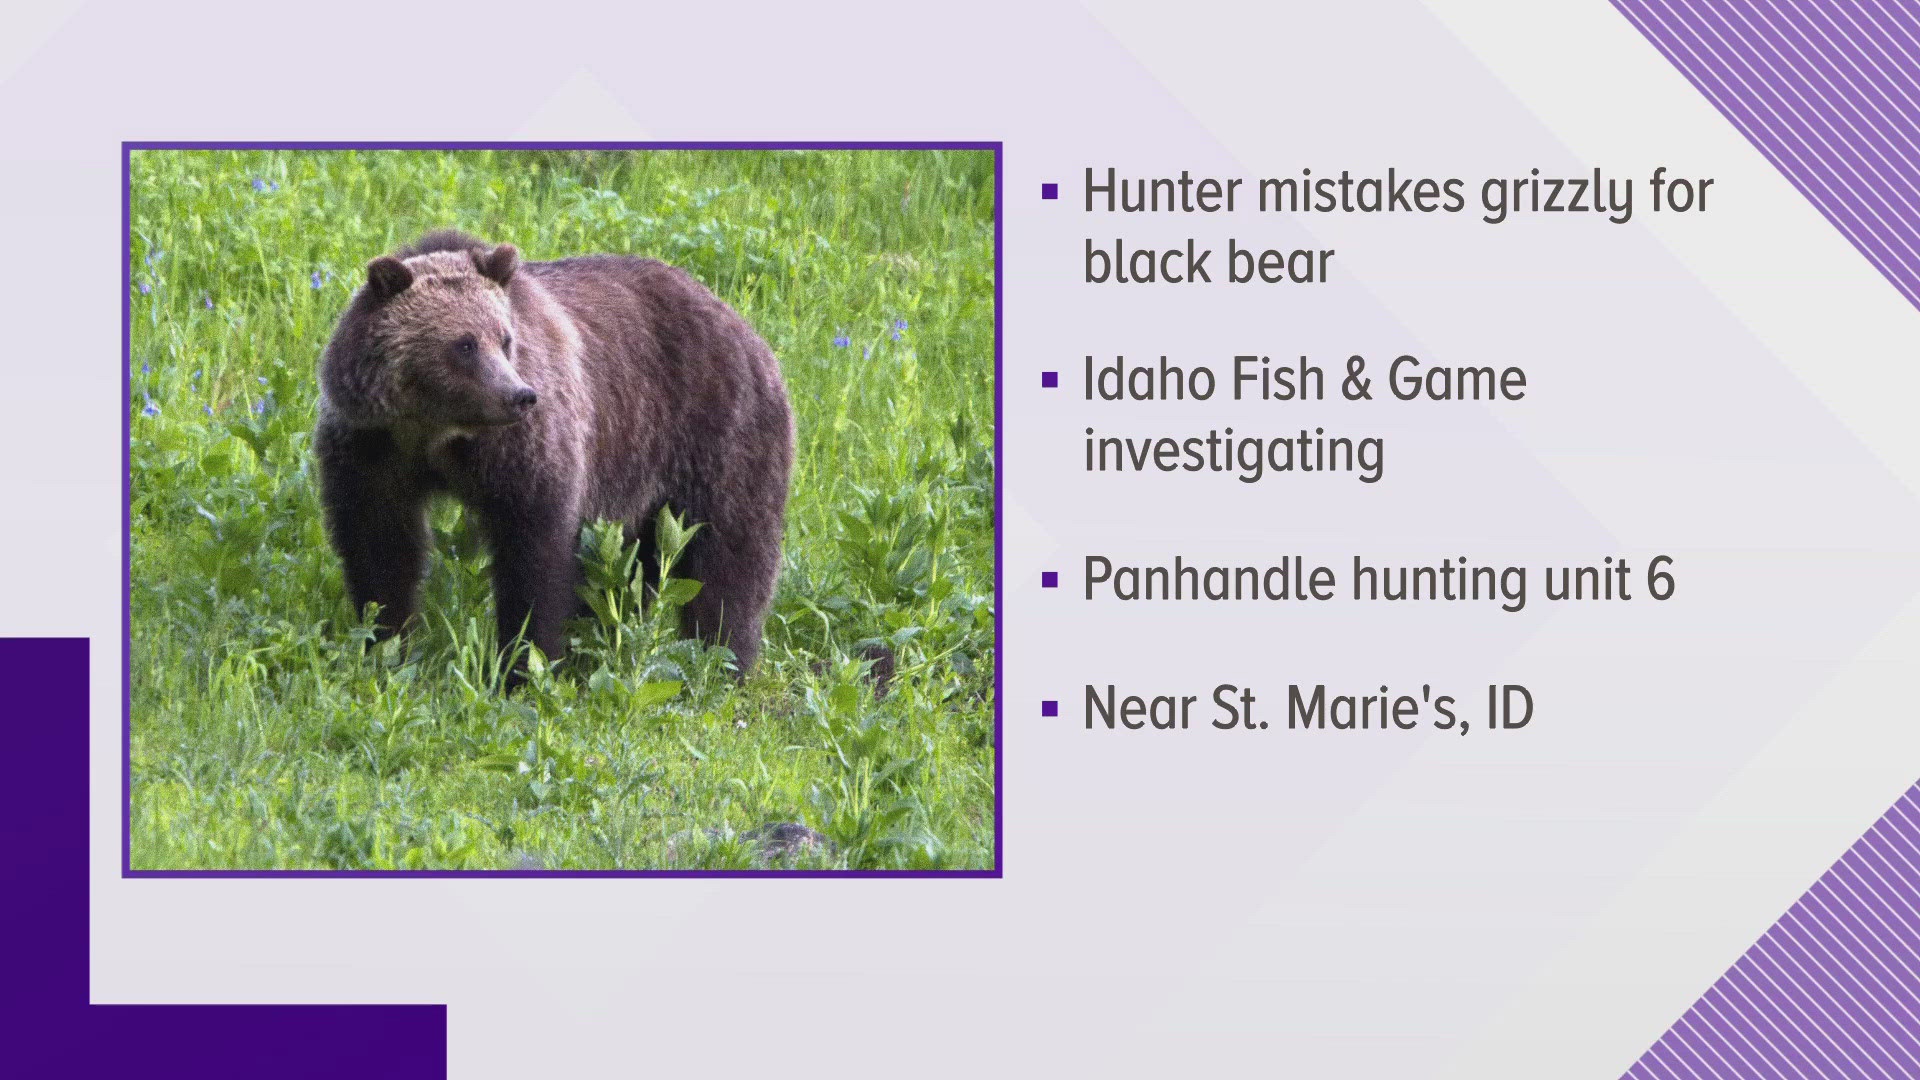 The bear was shot in an area not commonly used by grizzly bears